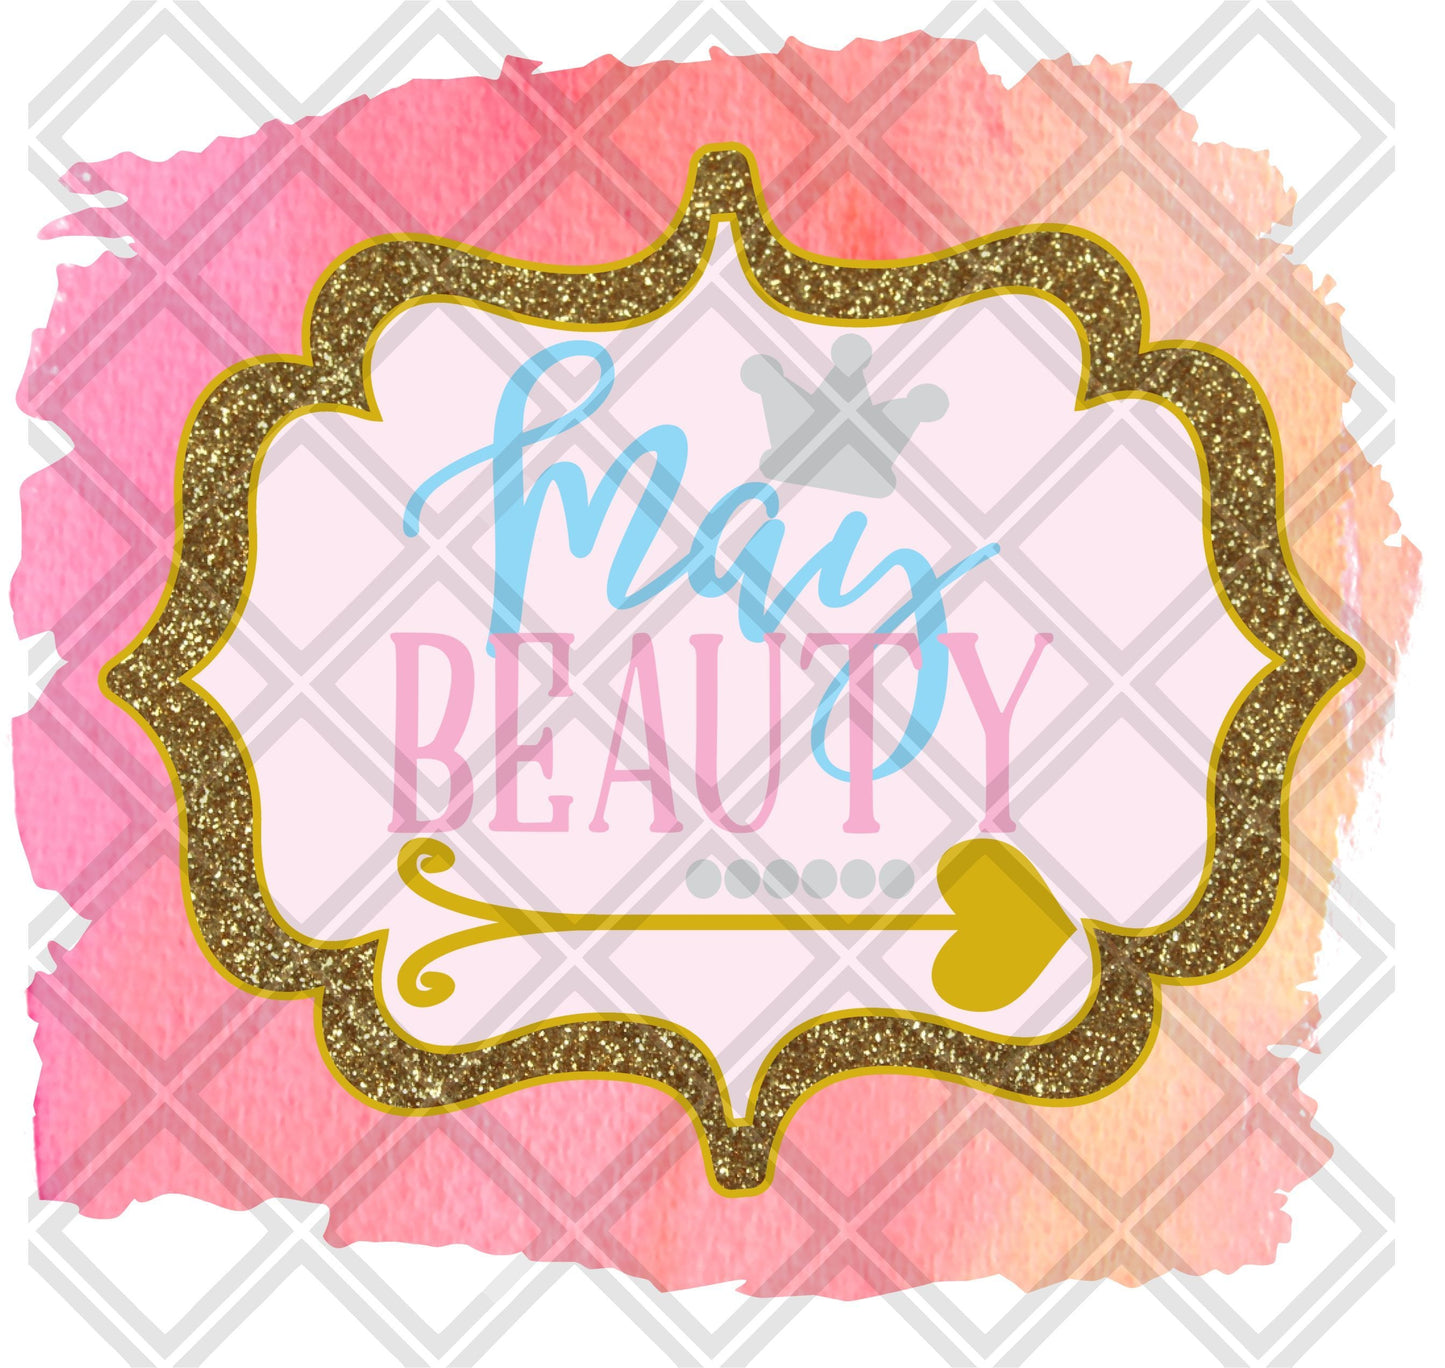 May Beauty Month DTF TRANSFERPRINT TO ORDER